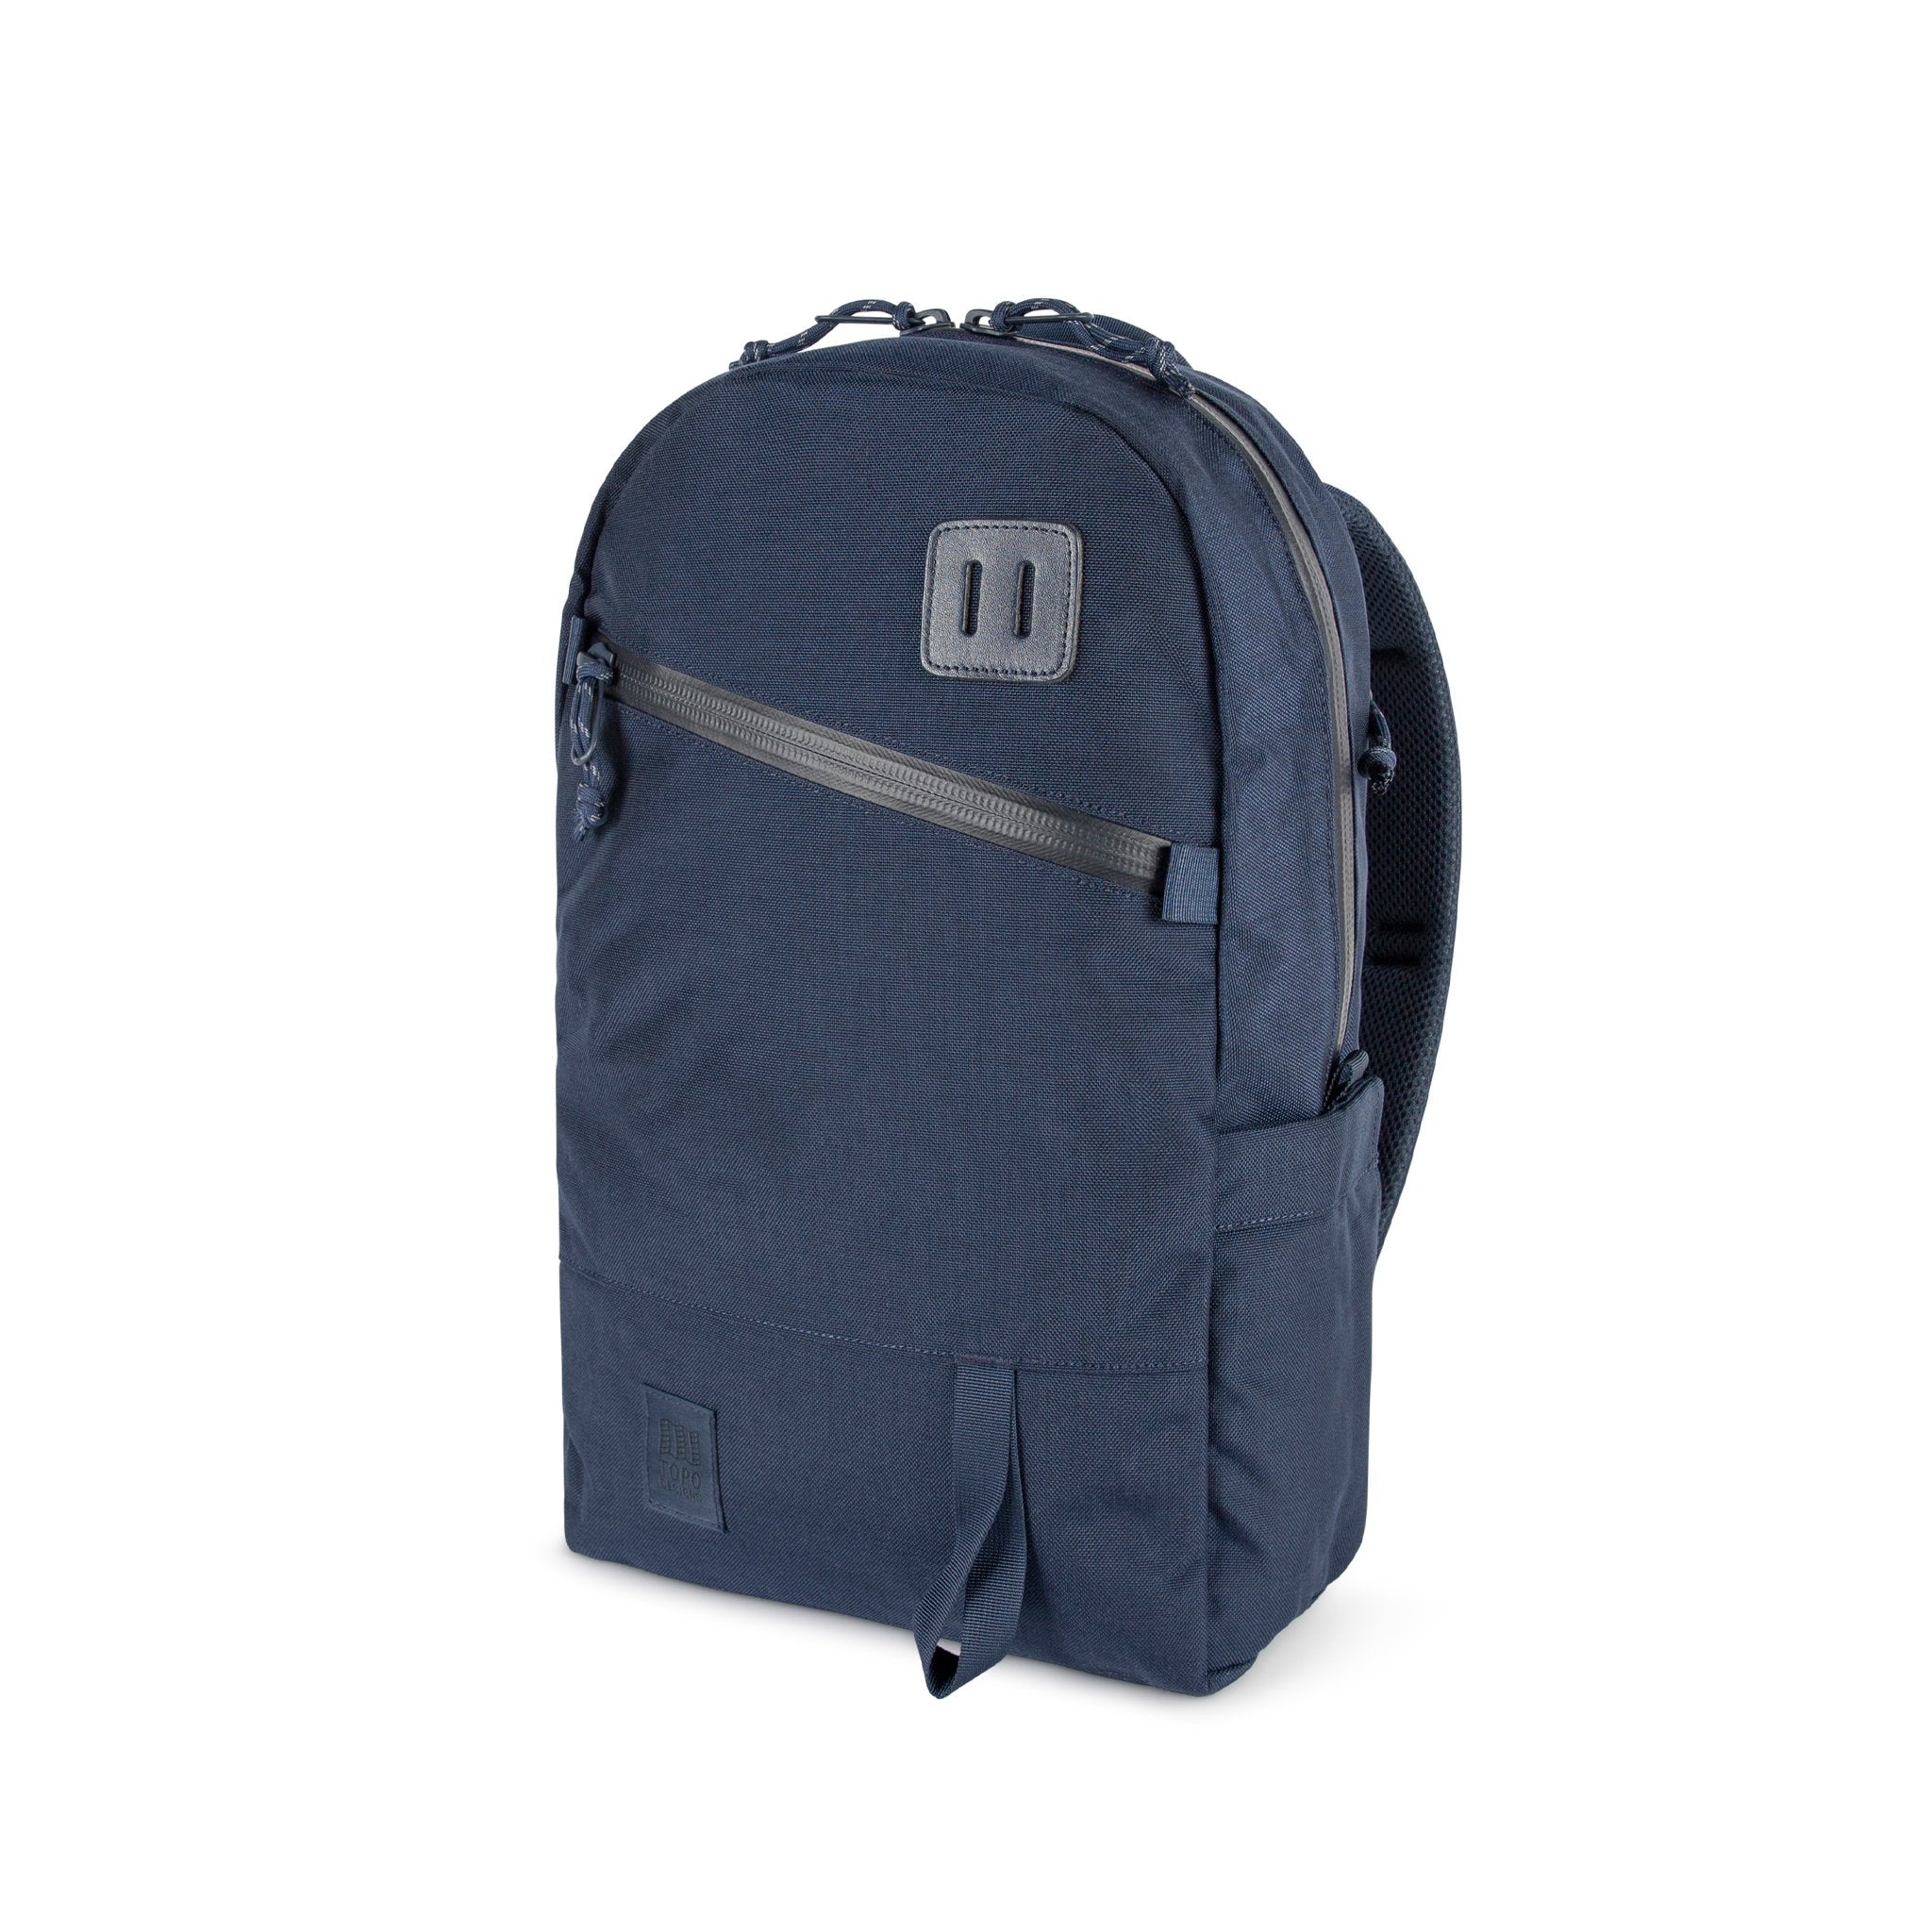 Topo Designs Daypack Tech 100% recycled nylon backpack with external laptop access in "Navy" blue.